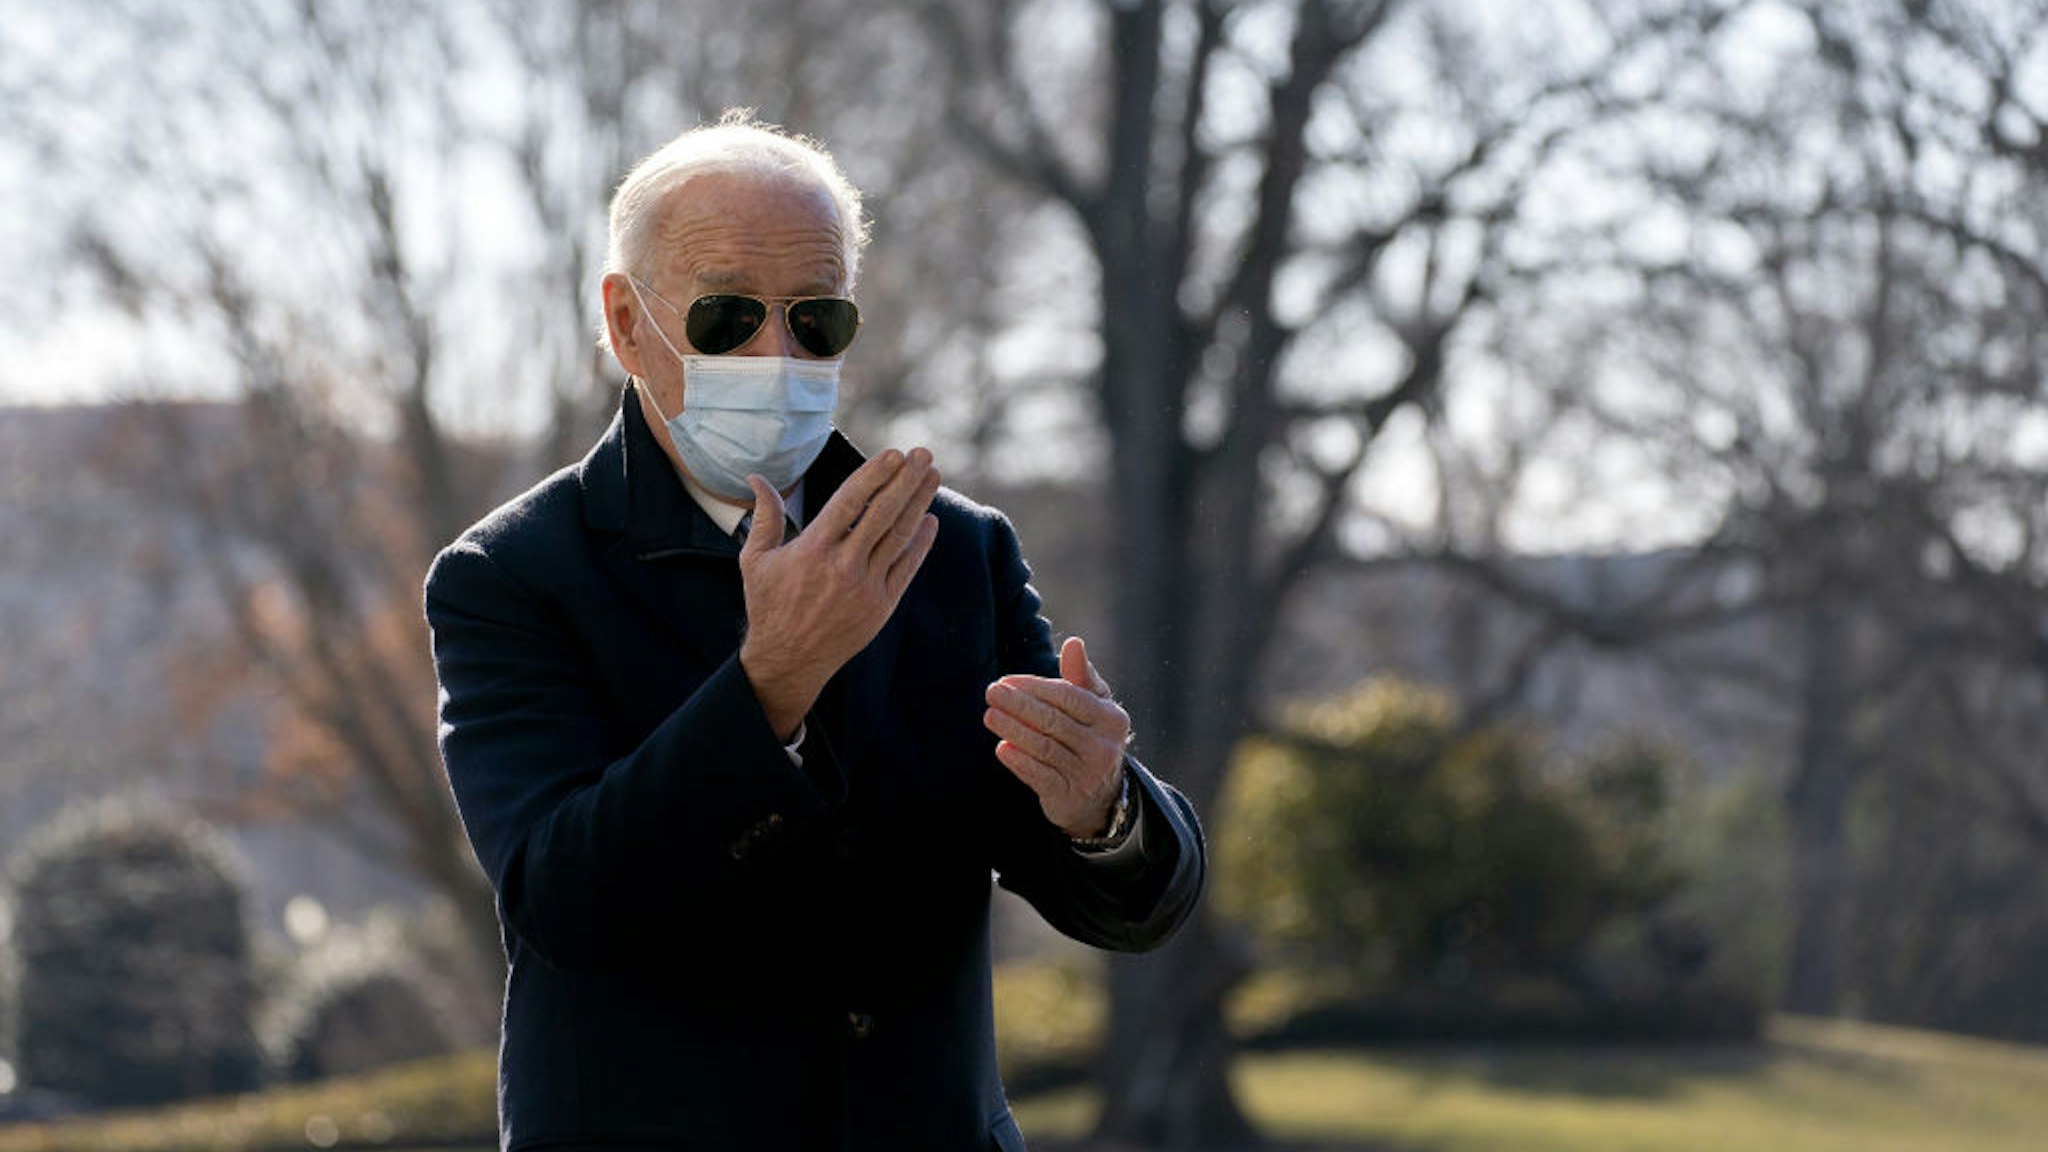 U.S. President Joe Biden wears a protective mask while speaking to members of the media on the South Lawn of the White House after arriving on Marine One in Washington, D.C., U.S., on Monday, Feb. 8, 2021.